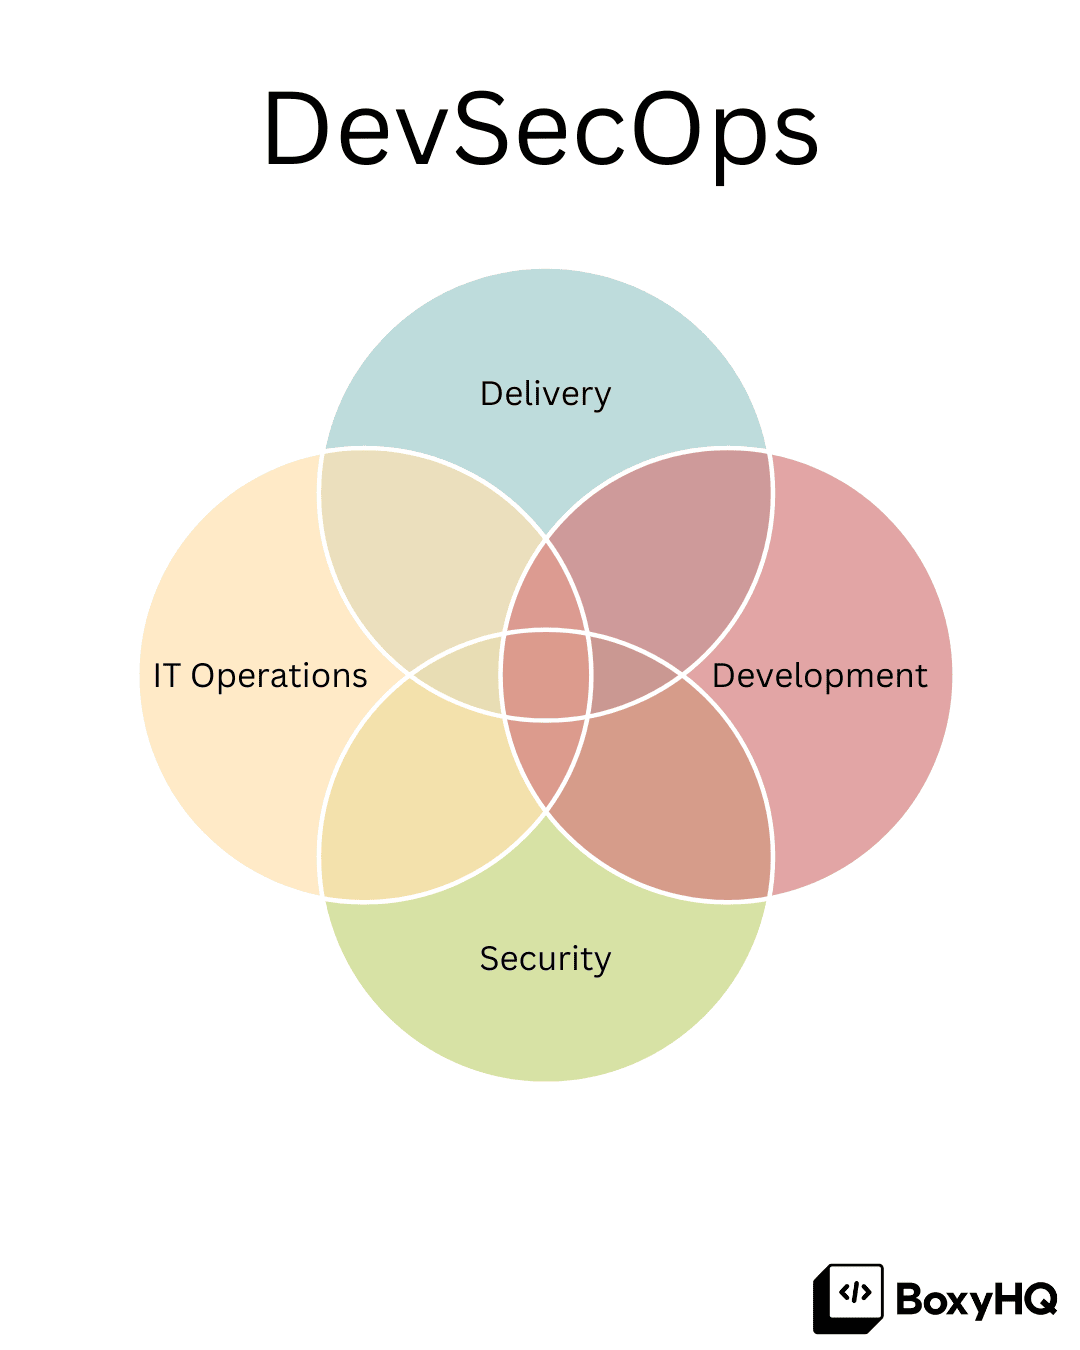 What is DevOps and how has it evolved into DevSecOps